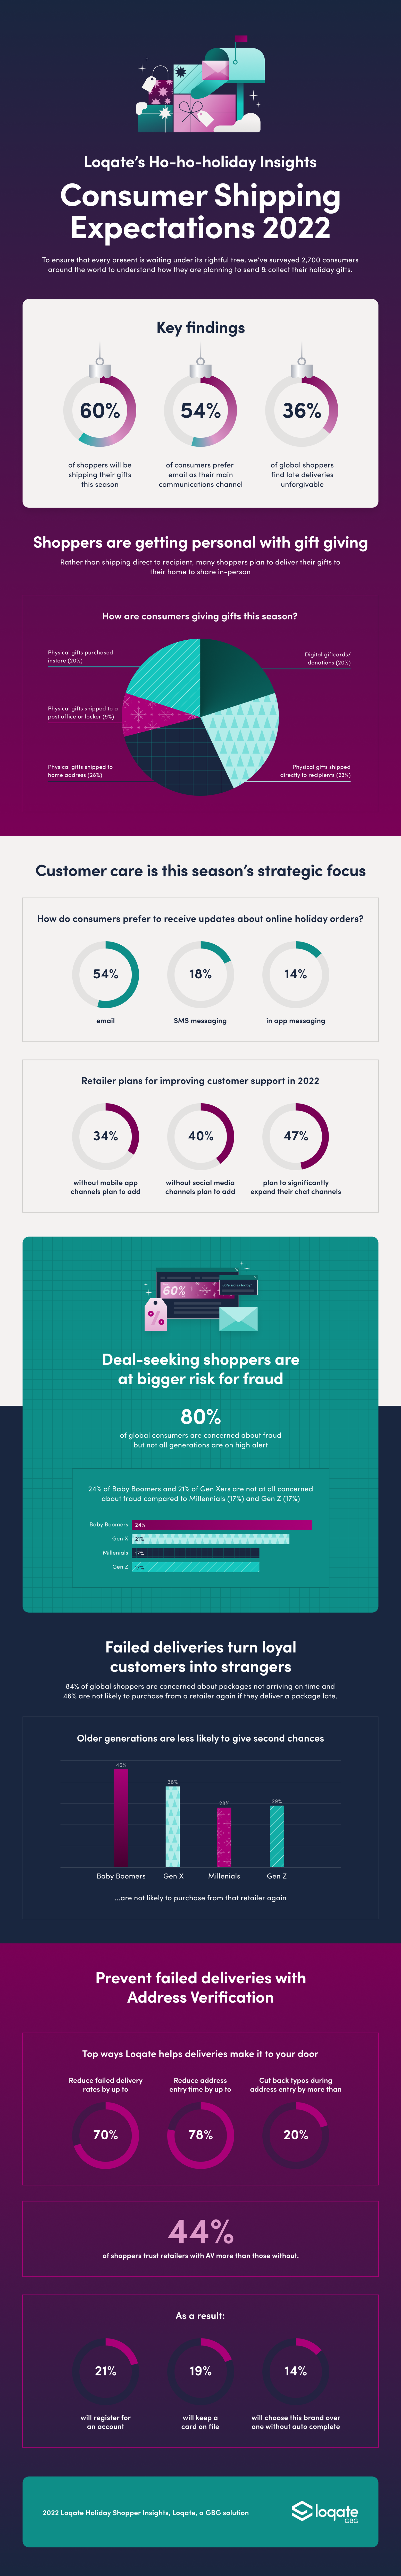 Consumer Shipping Expectations - Holiday Insights 2022 from Loqate